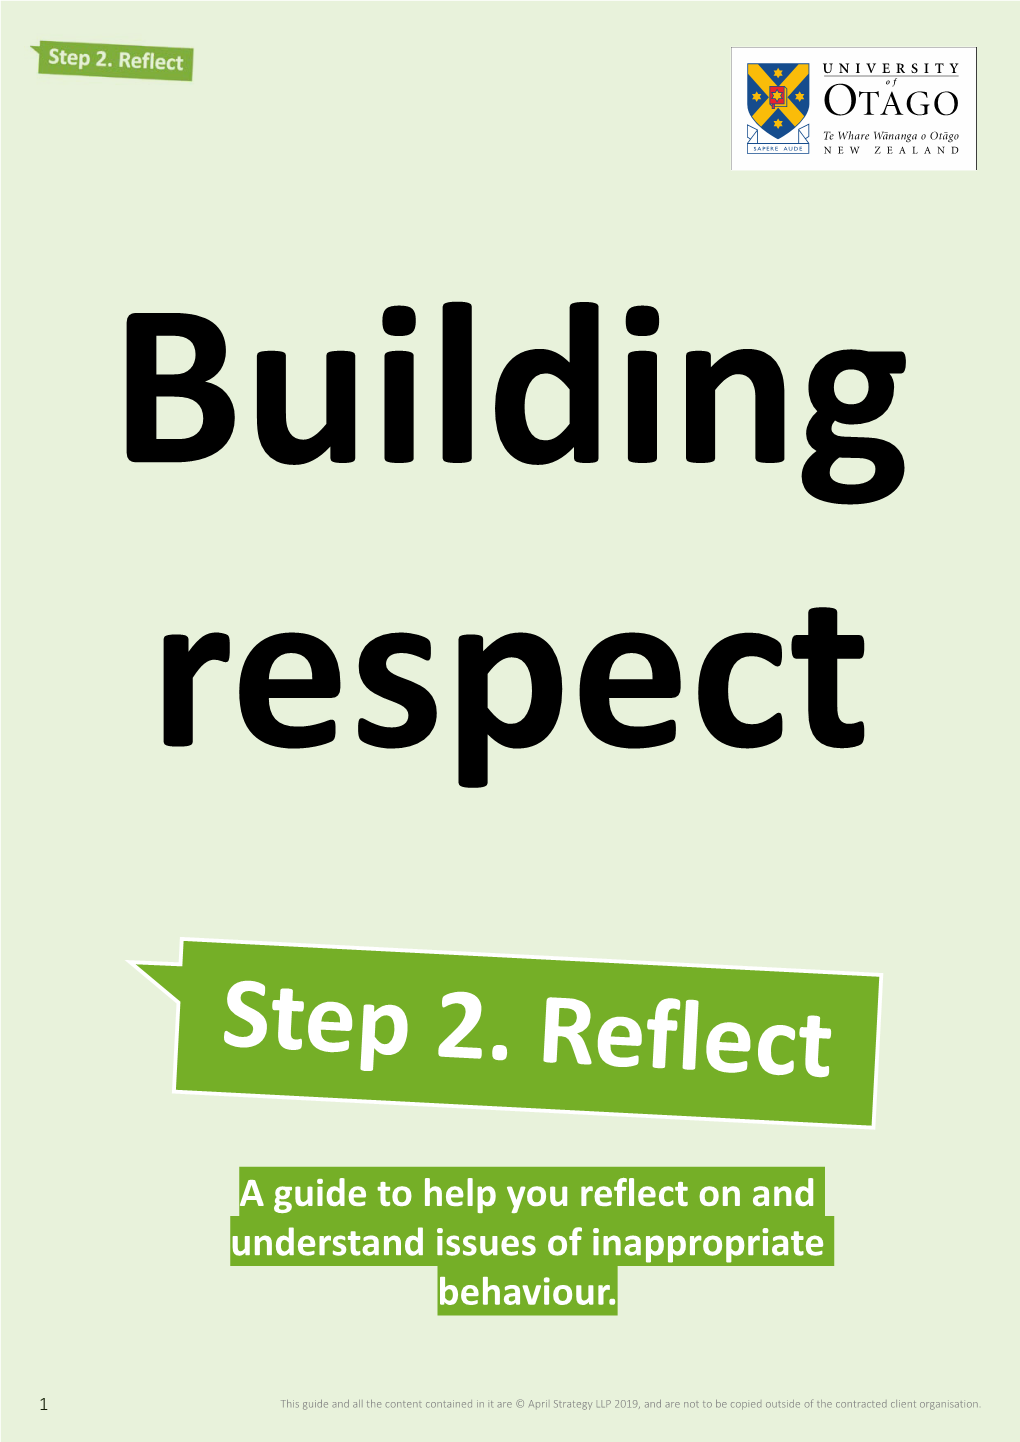 A Guide to Help You Reflect on and Understand Issues of Inappropriate Behaviour